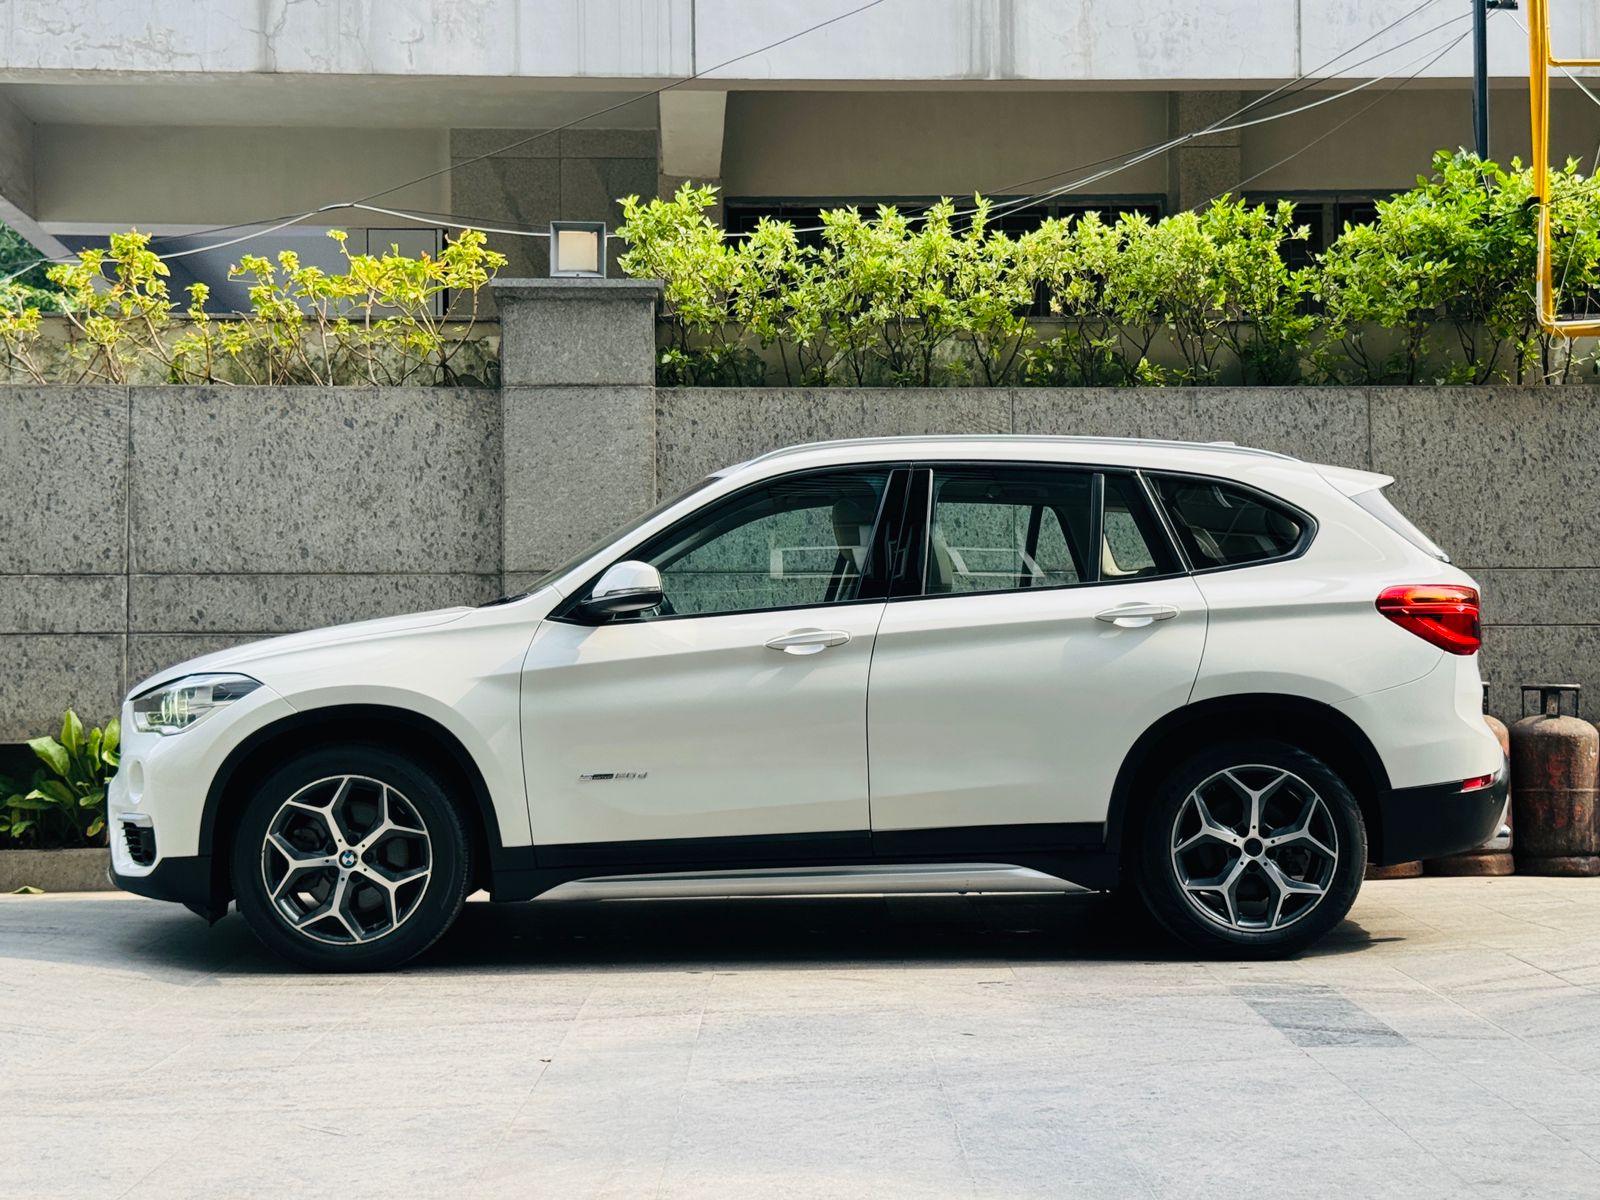 2017 BMW X1 sDrive 20d: Expert Reviews and Specifications